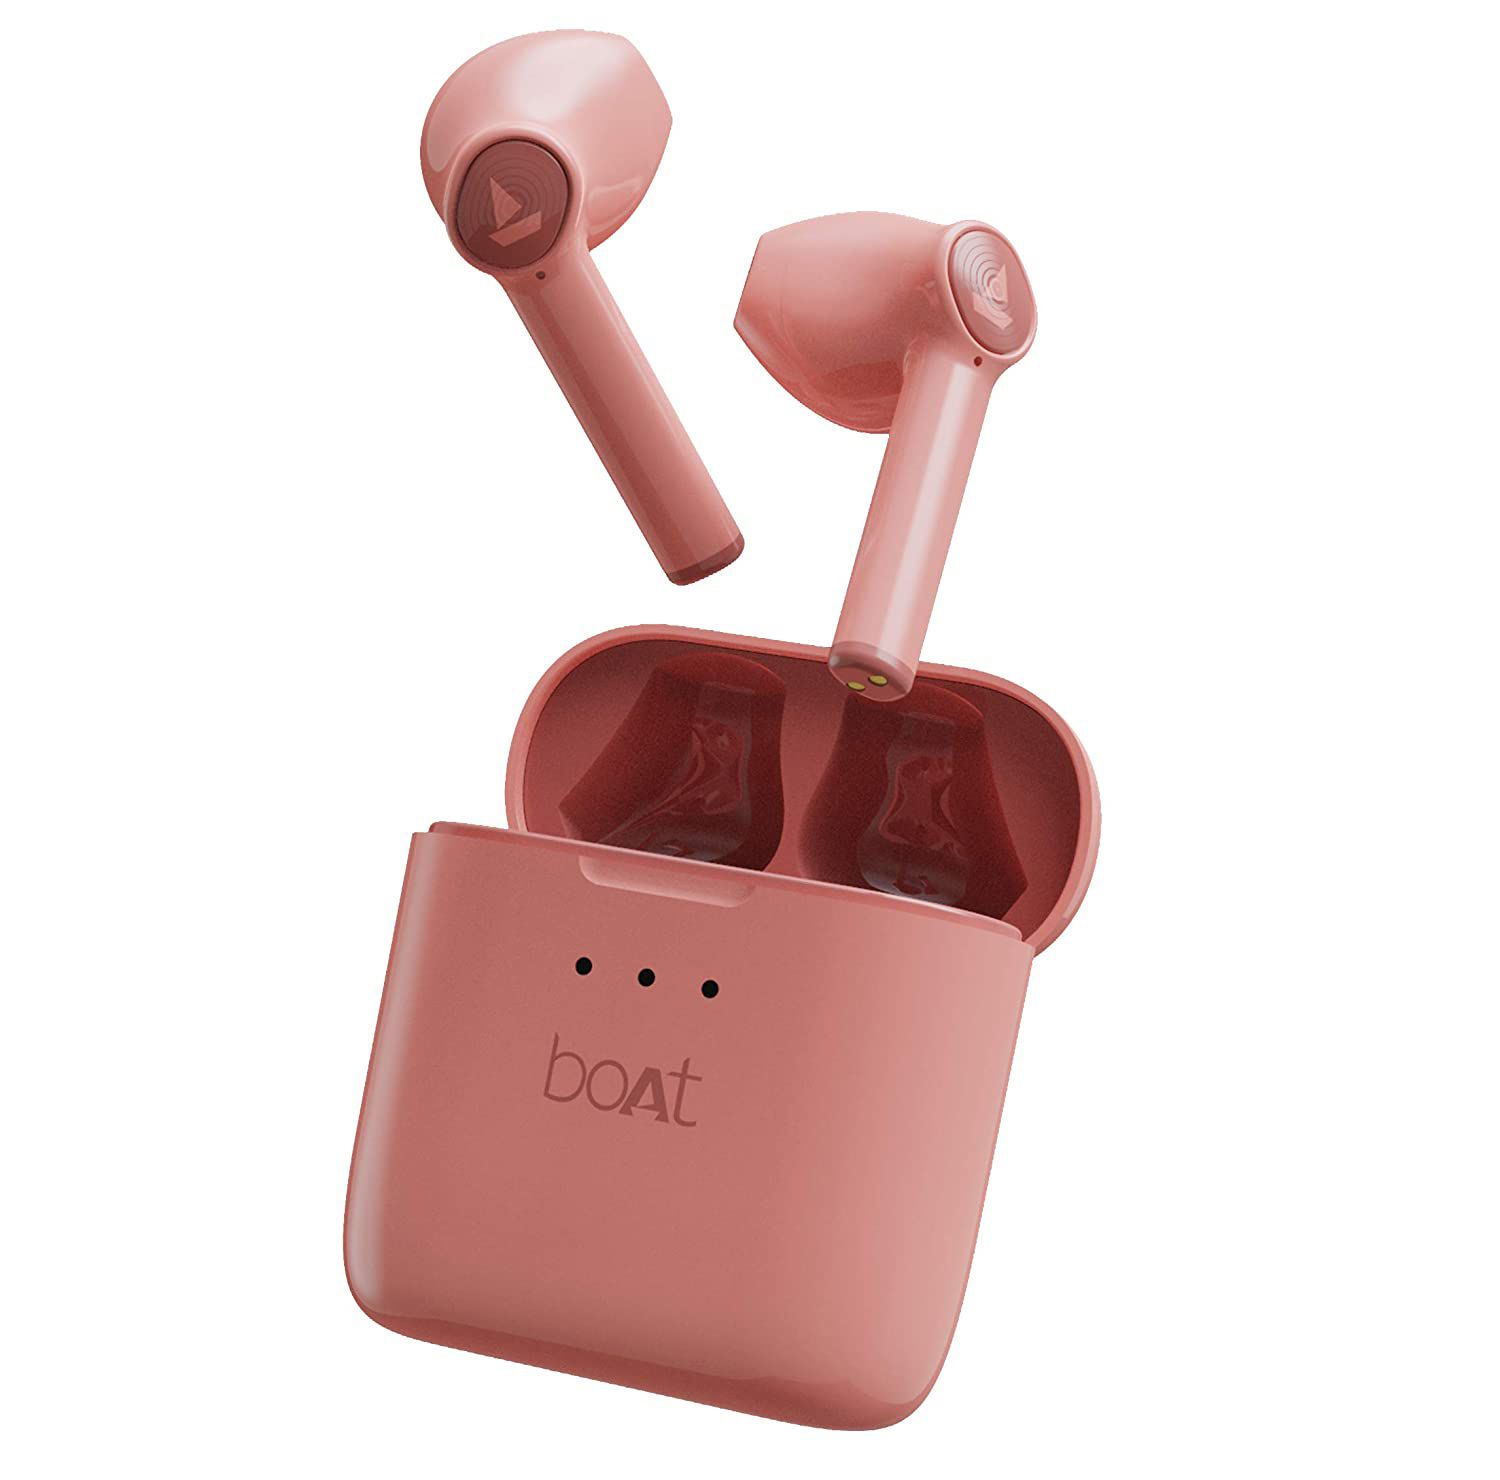 boAt Airdopes 131/138 Twin Wireless Earbuds with IWP Technology, Bluetooth V5.0, Immersive Audio, Up to 15H Total Playback, Instant Voice Assistant and Type-C Charging,Bluetooth Earphone (Cherry Blossom)